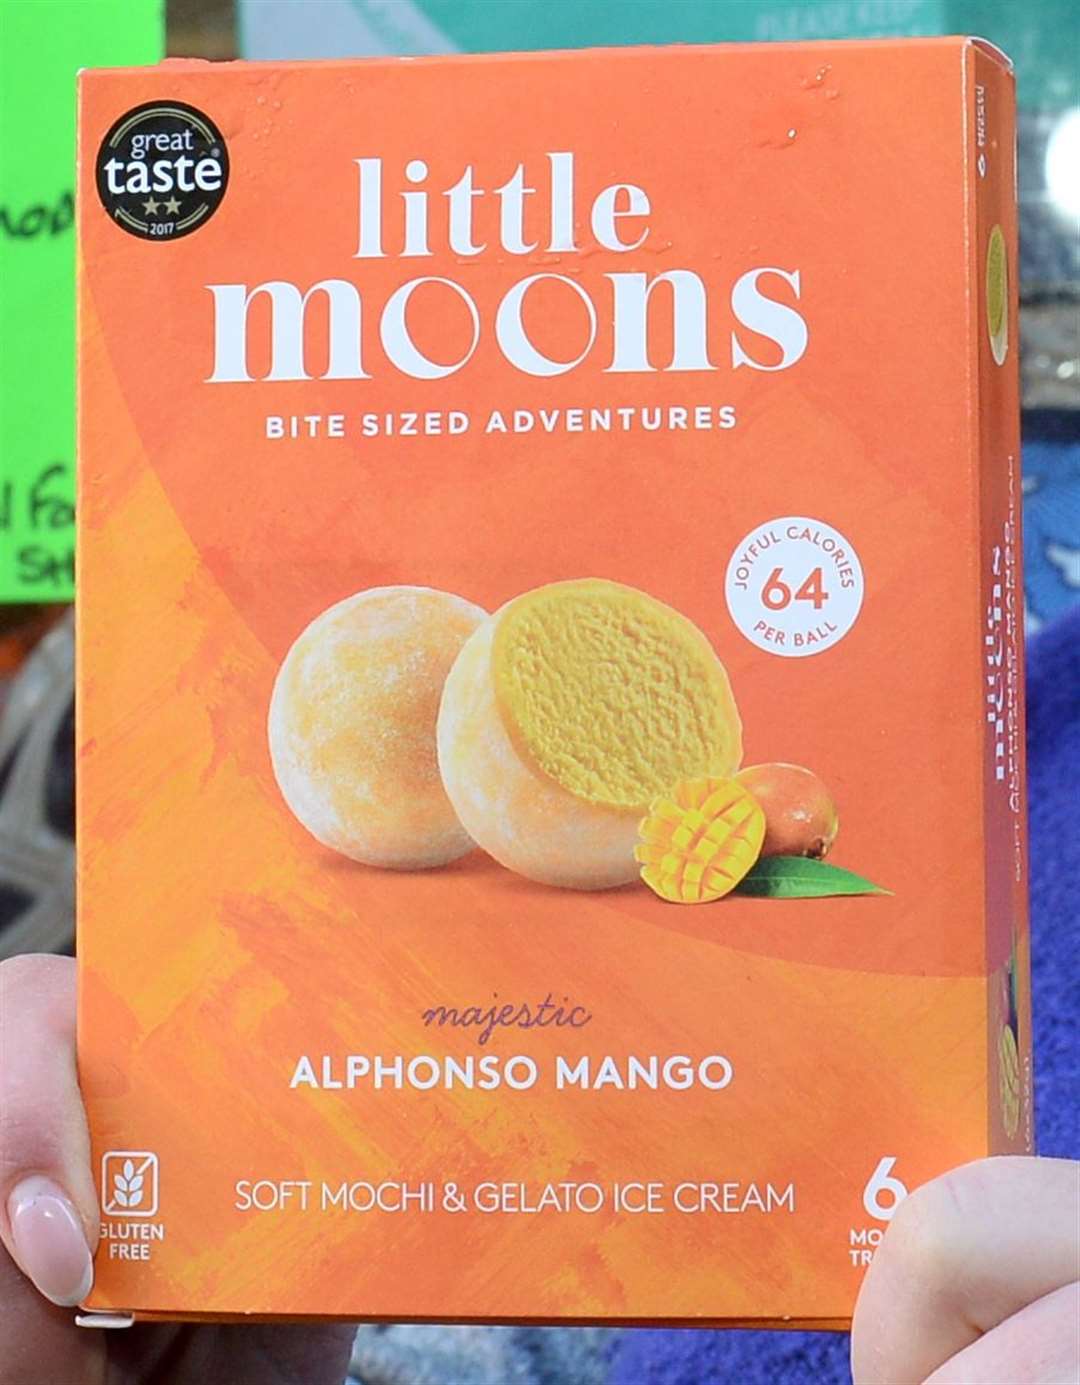 The box of Little Moons ice creams was bought for £50.